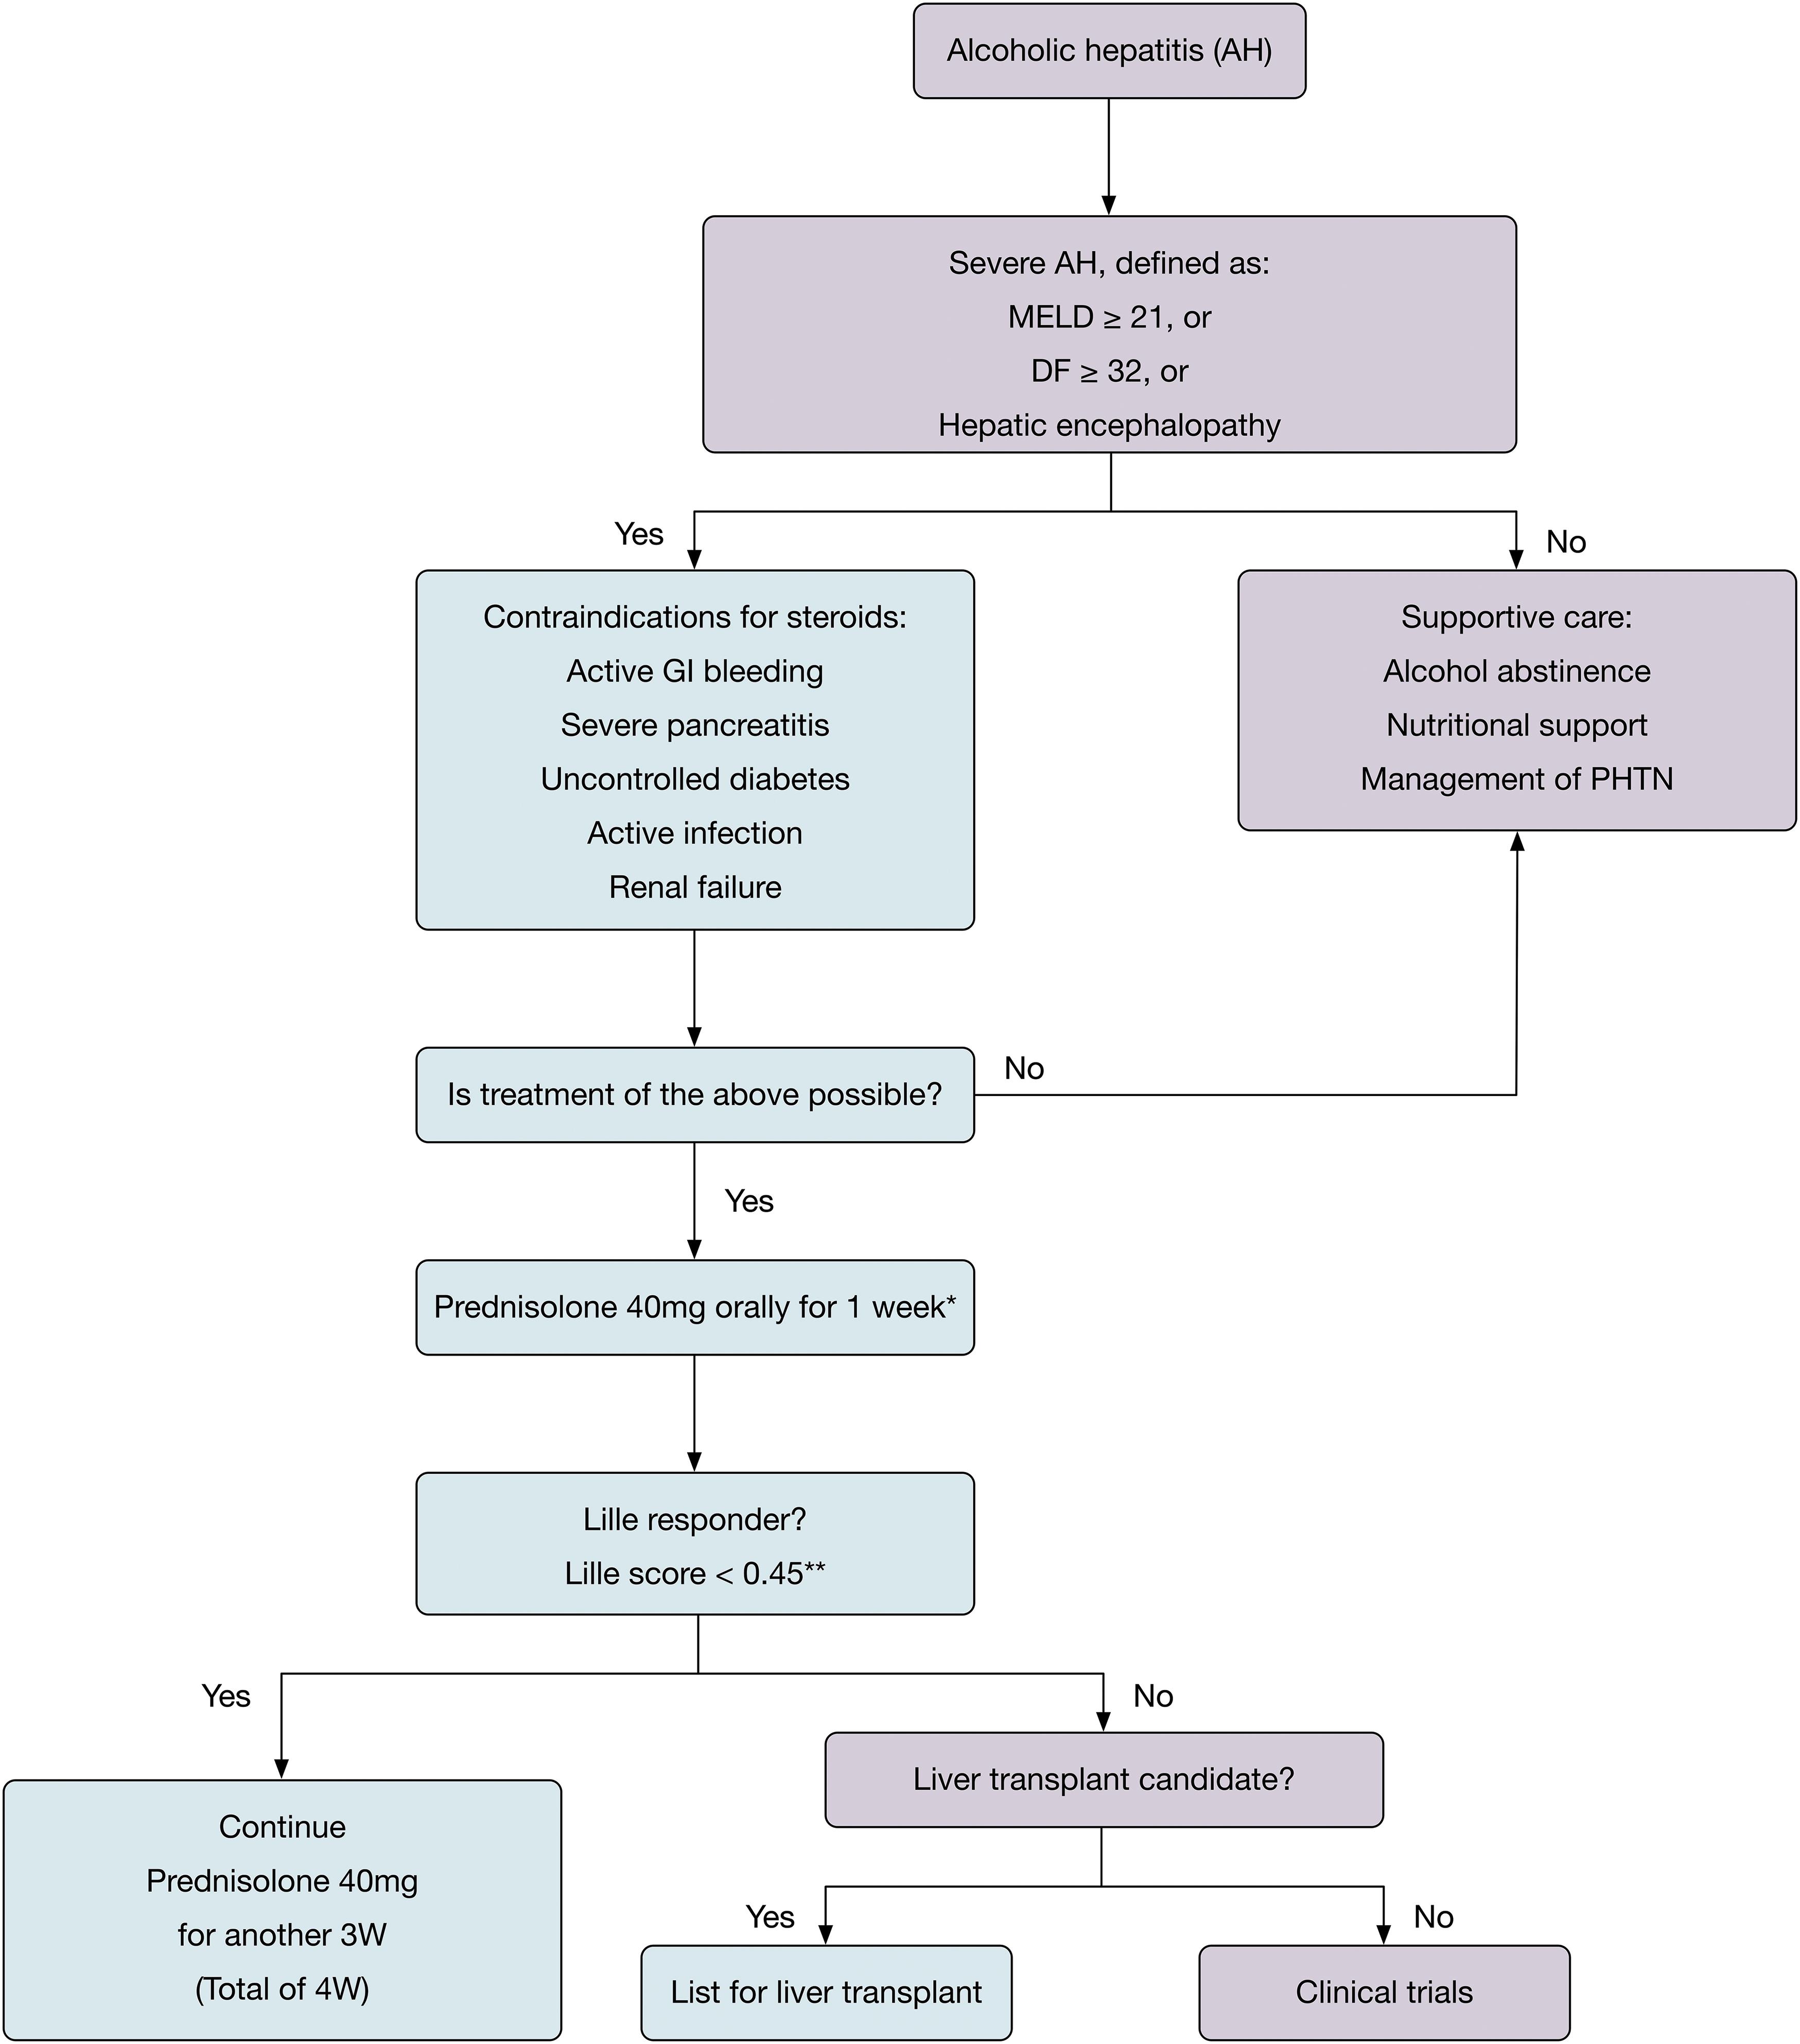 Proposed algorithm for management of patients with alcoholic hepatitis.